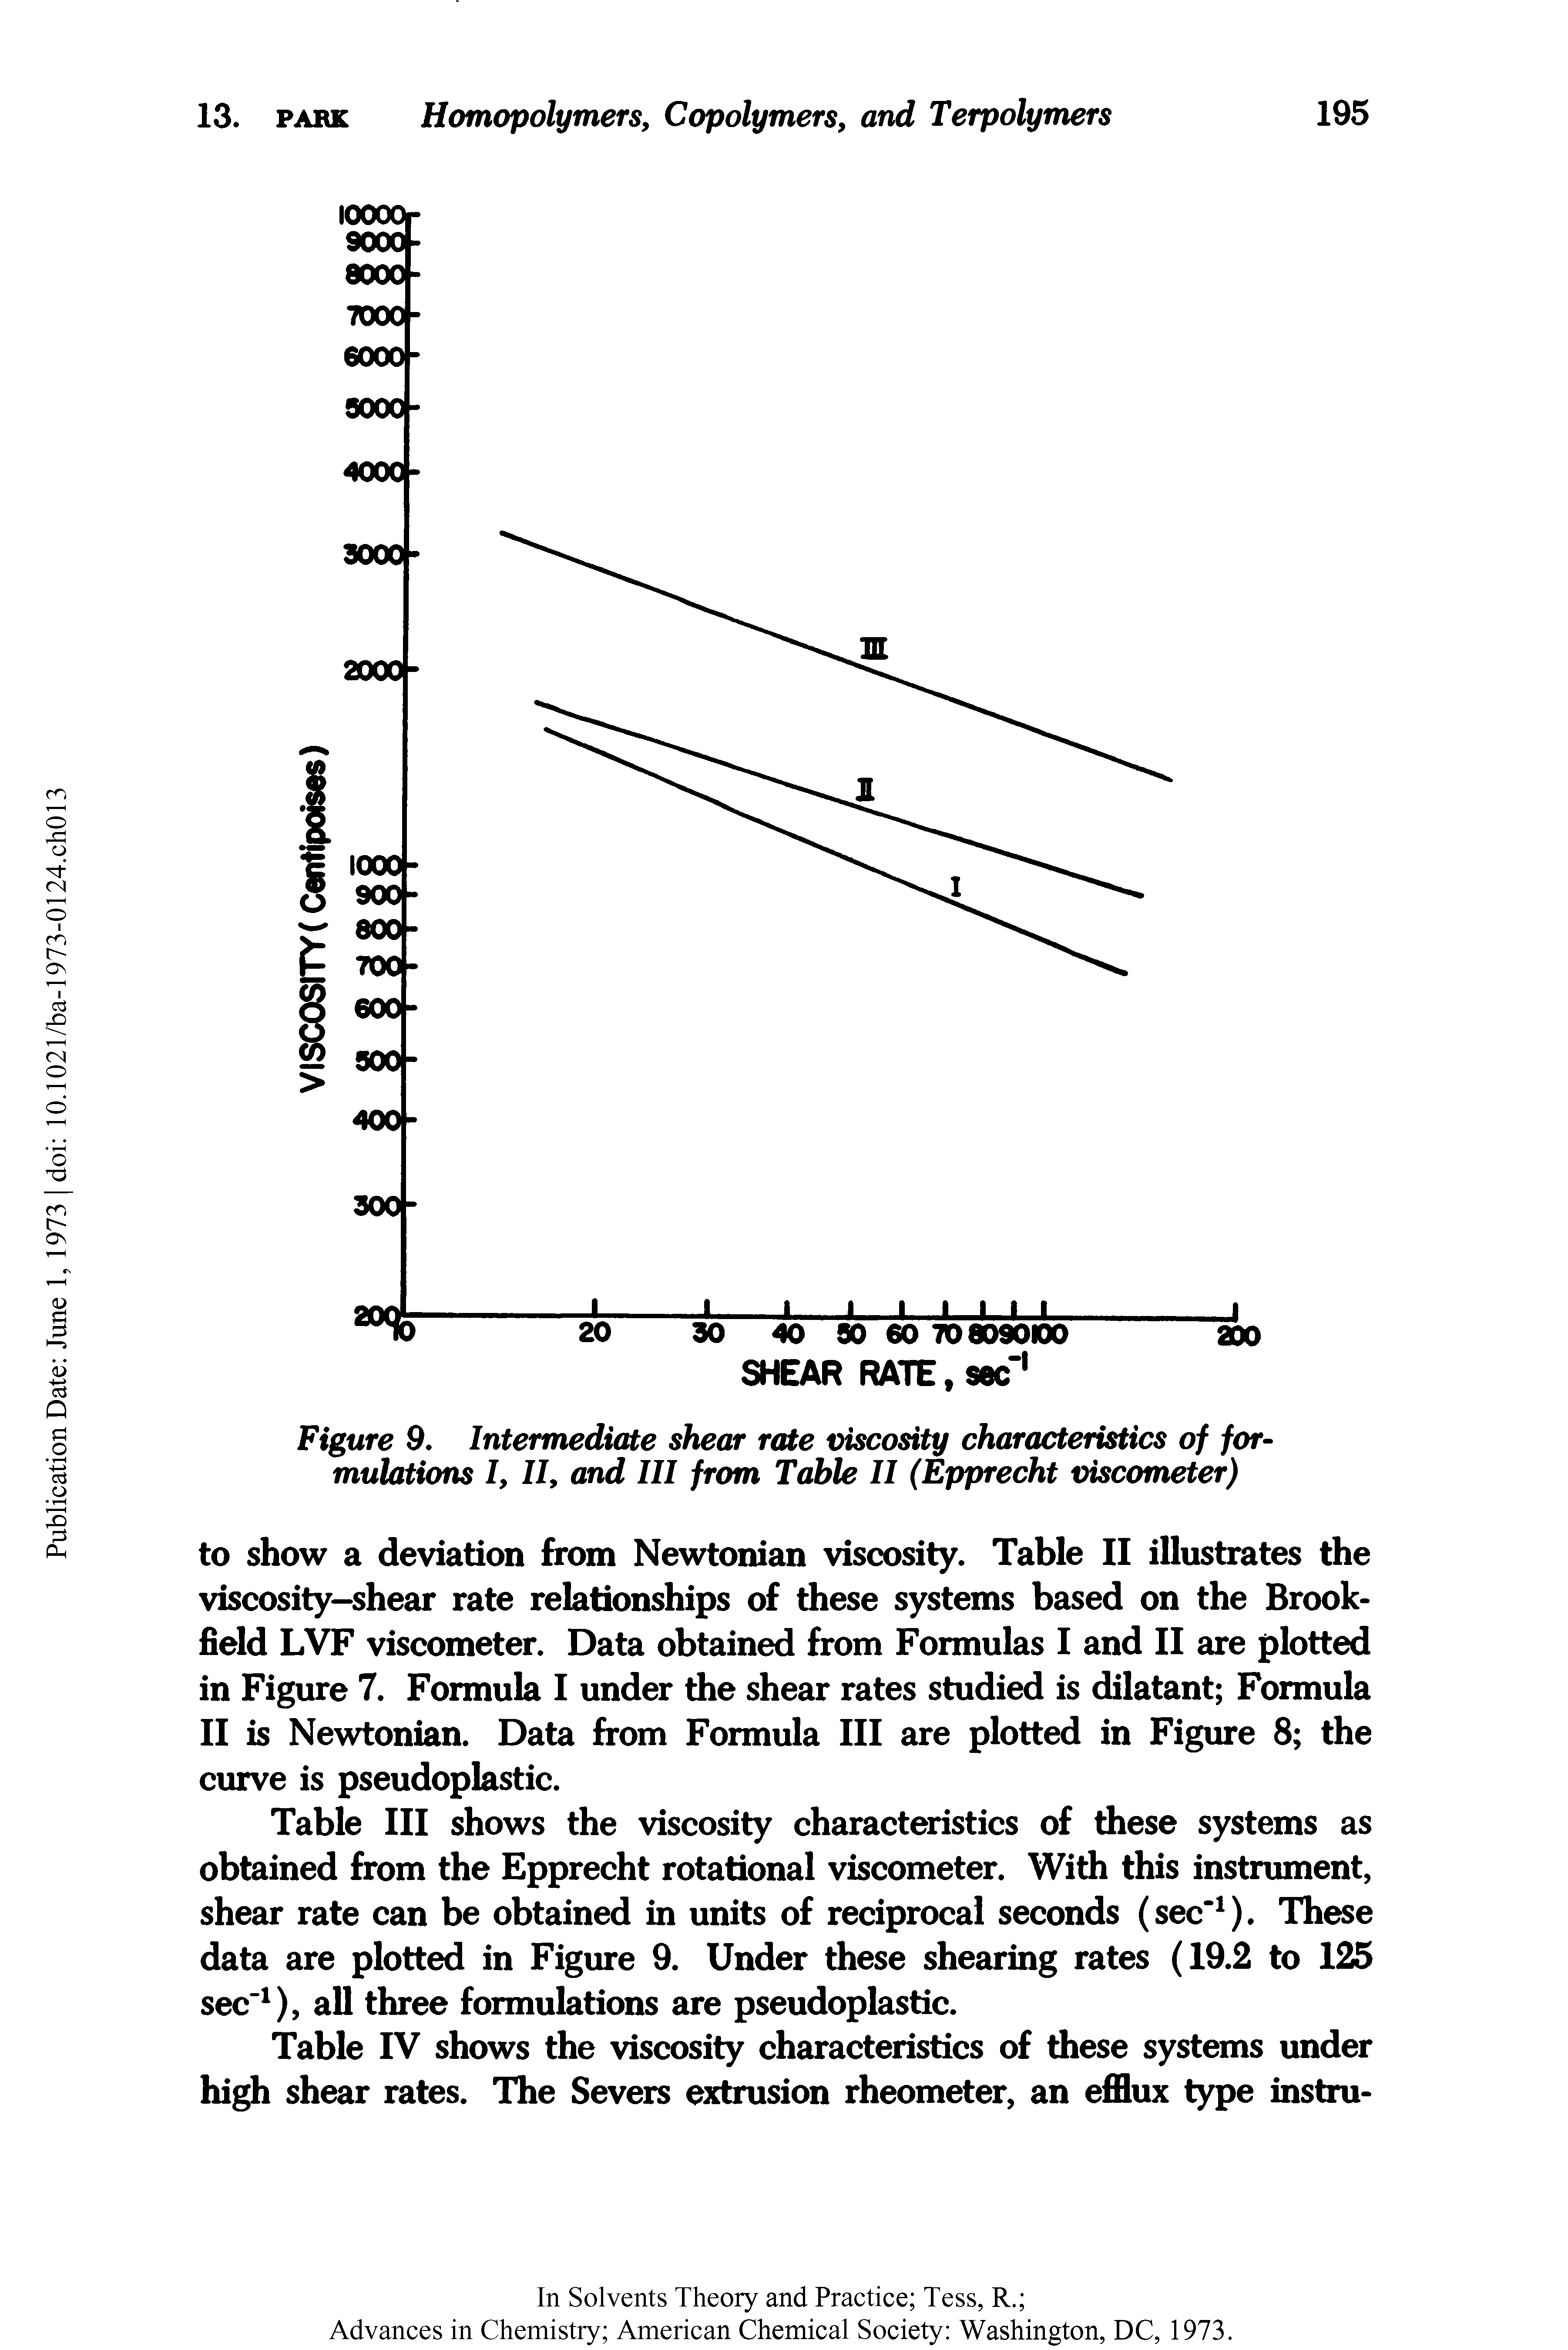 Table III shows the viscosity characteristics of these systems as obtained from the Epprecht rotational viscometer. With this instrument, shear rate can be obtained in units of reciprocal seconds (sec-1). These data are plotted in Figure 9. Under these shearing rates (19.2 to 125 sec"1), all three formulations are pseudoplastic.